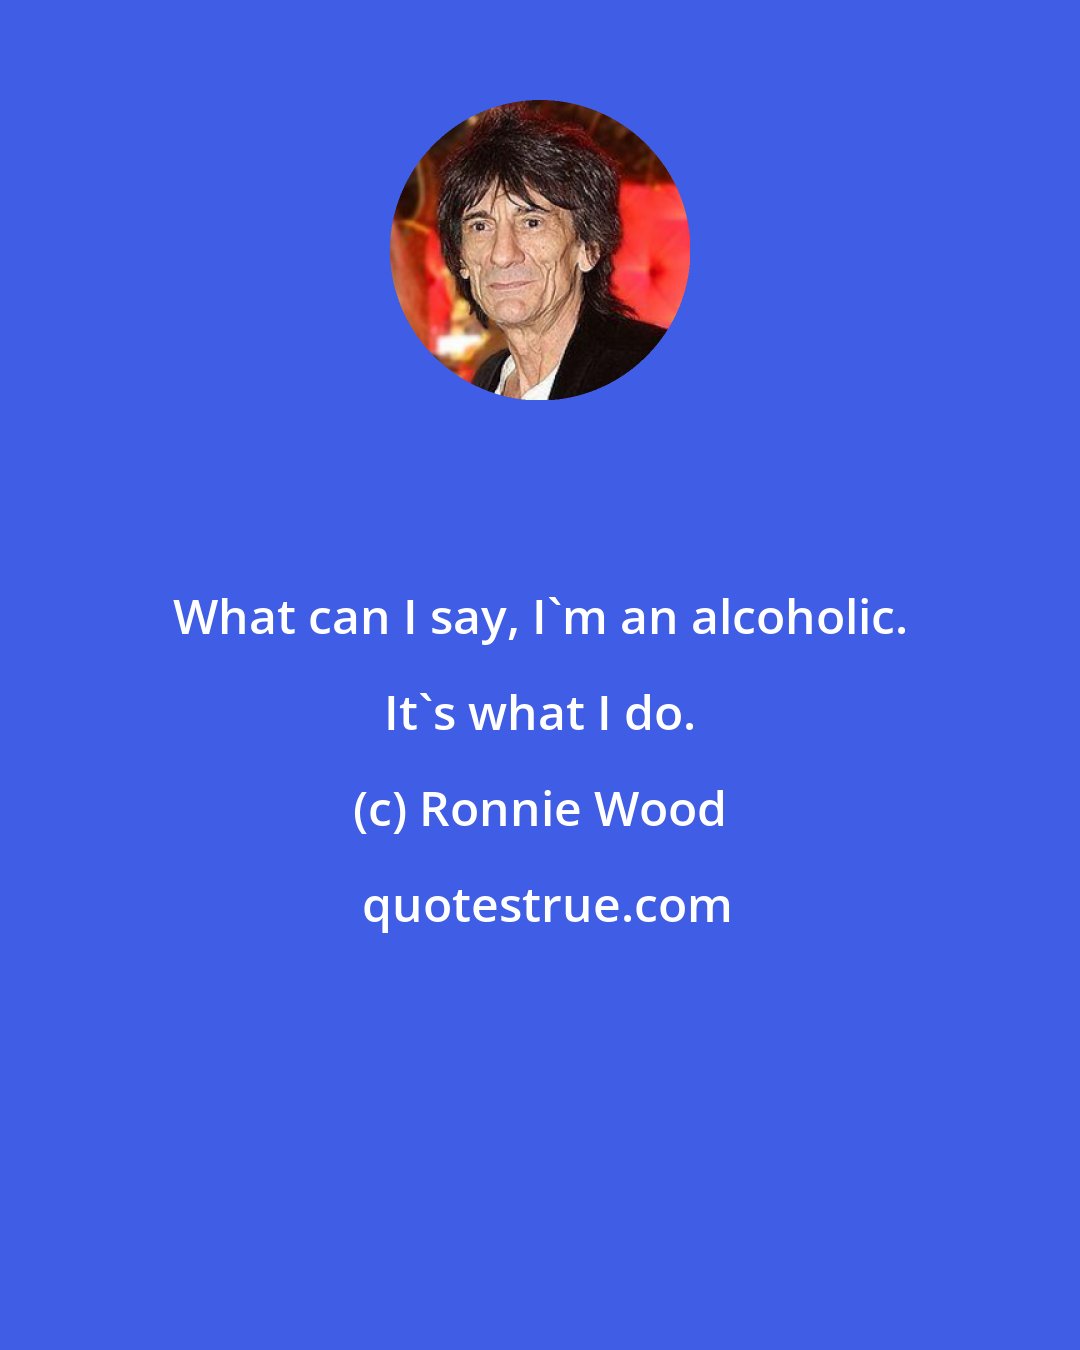 Ronnie Wood: What can I say, I'm an alcoholic. It's what I do.